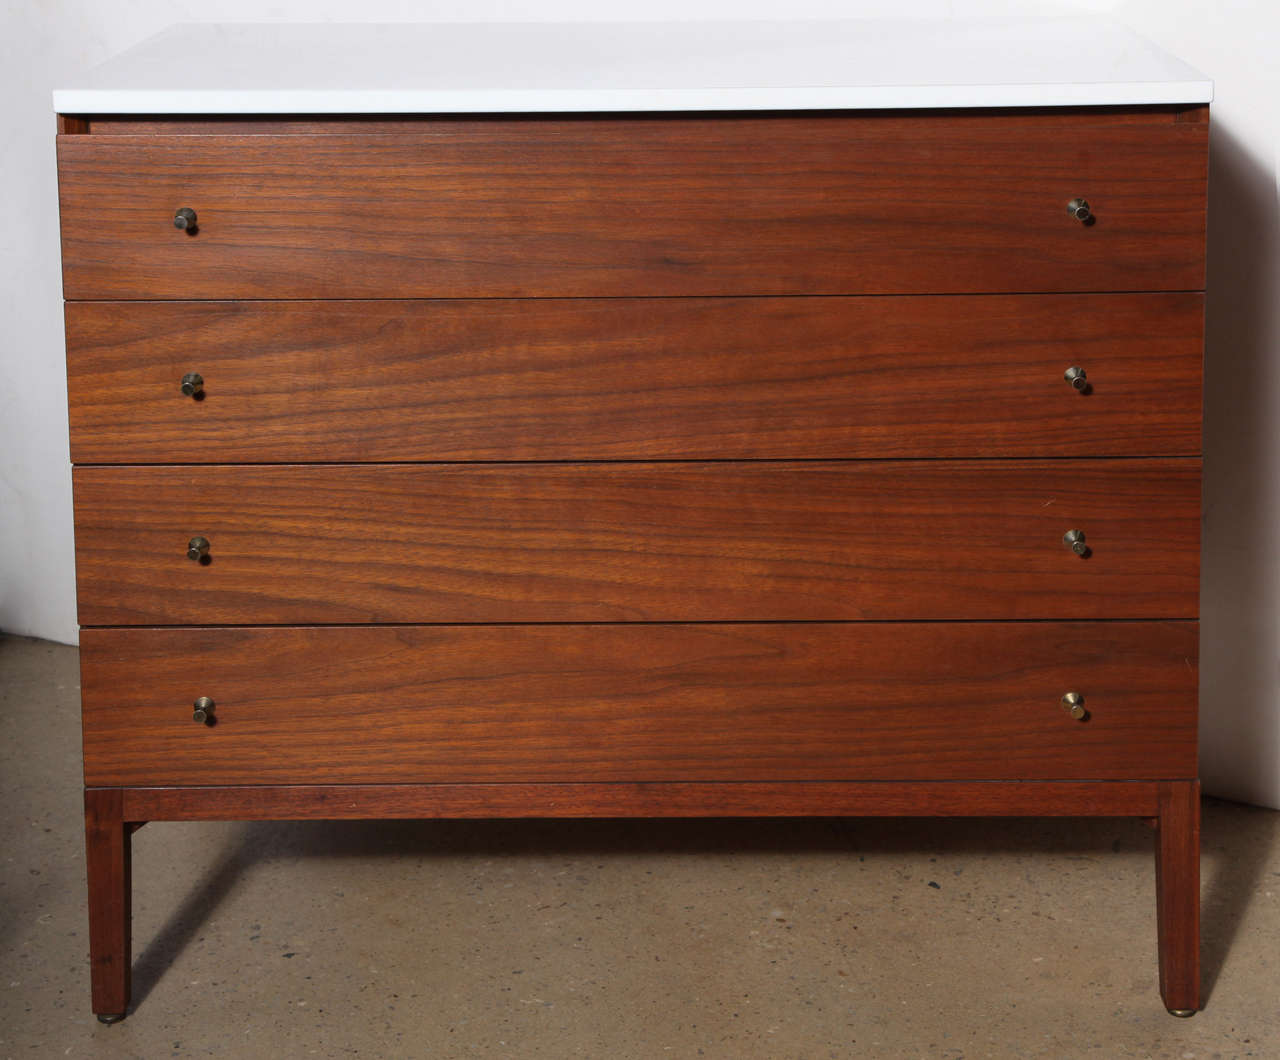 rare Paul McCobb for Calvin, Grand Rapids Modernist 4 drawer Walnut Dresser with original White Milk Glass top and hour glass hardware.  Extremely clean, original condition.  Metal Label inside

*COSMO SUMMER HOURS* 
open Monday-Thursday